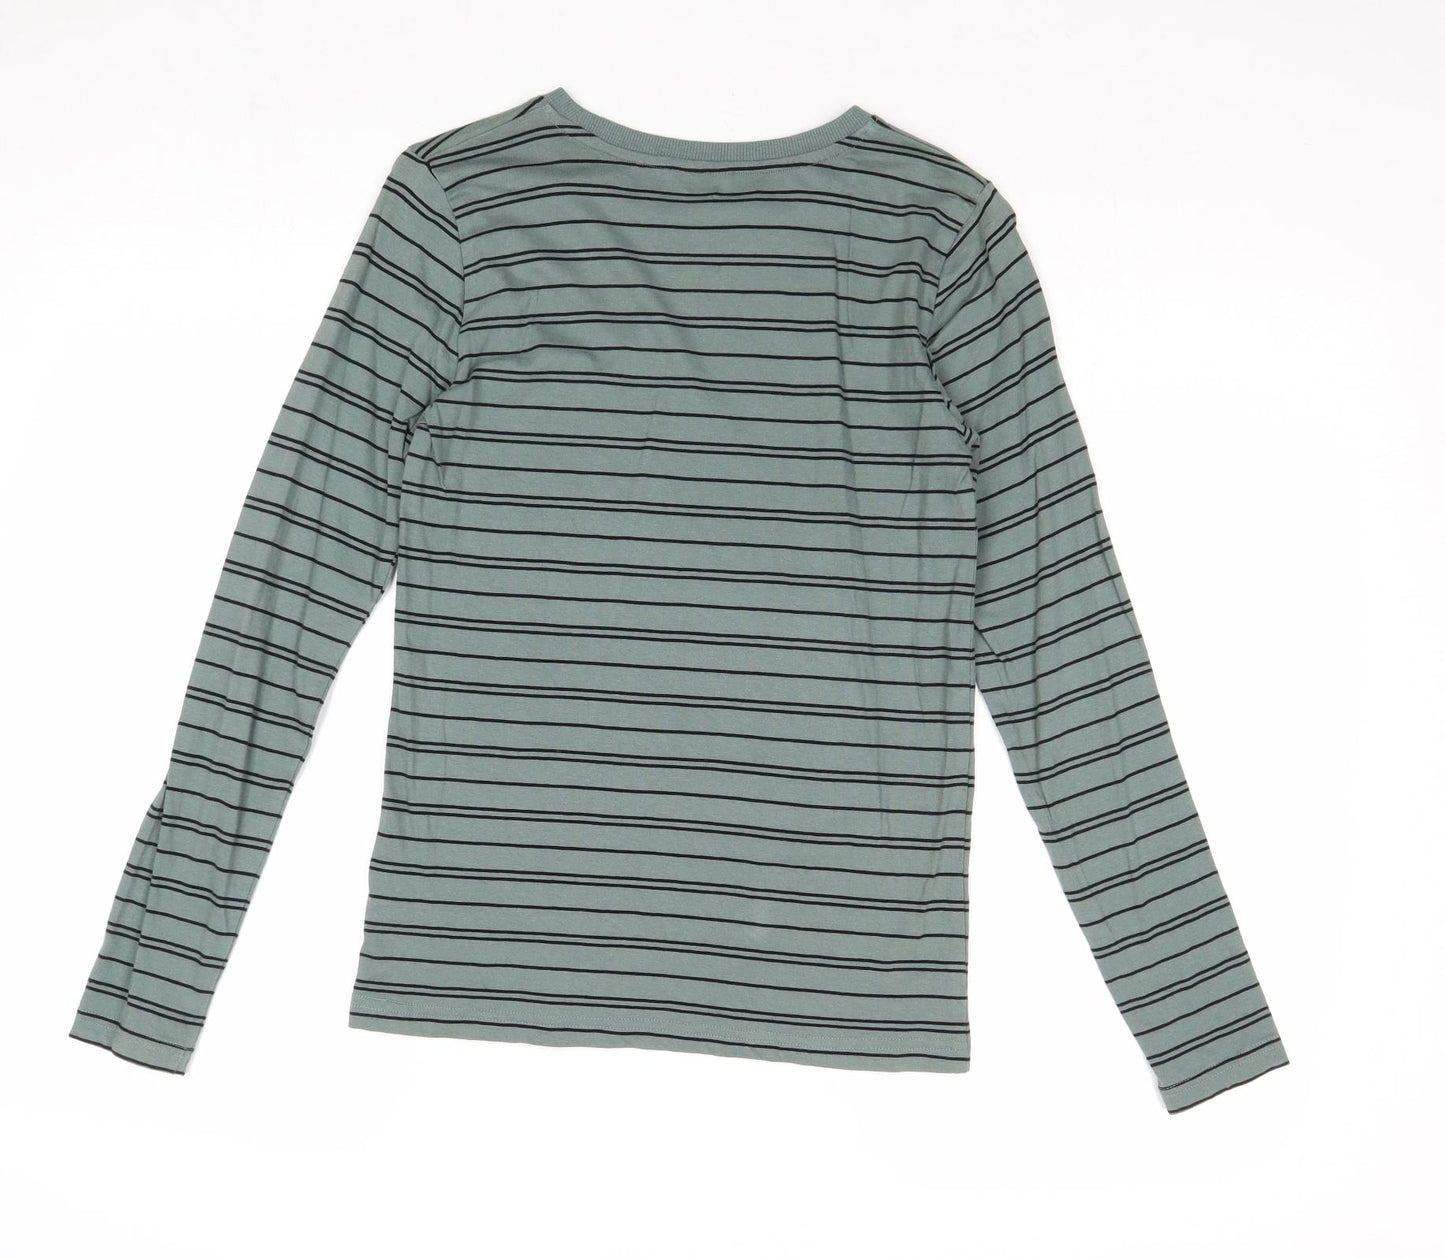 M&Co Boys Green Striped Cotton Basic T-Shirt Size 13-14 Years Round Neck Pullover